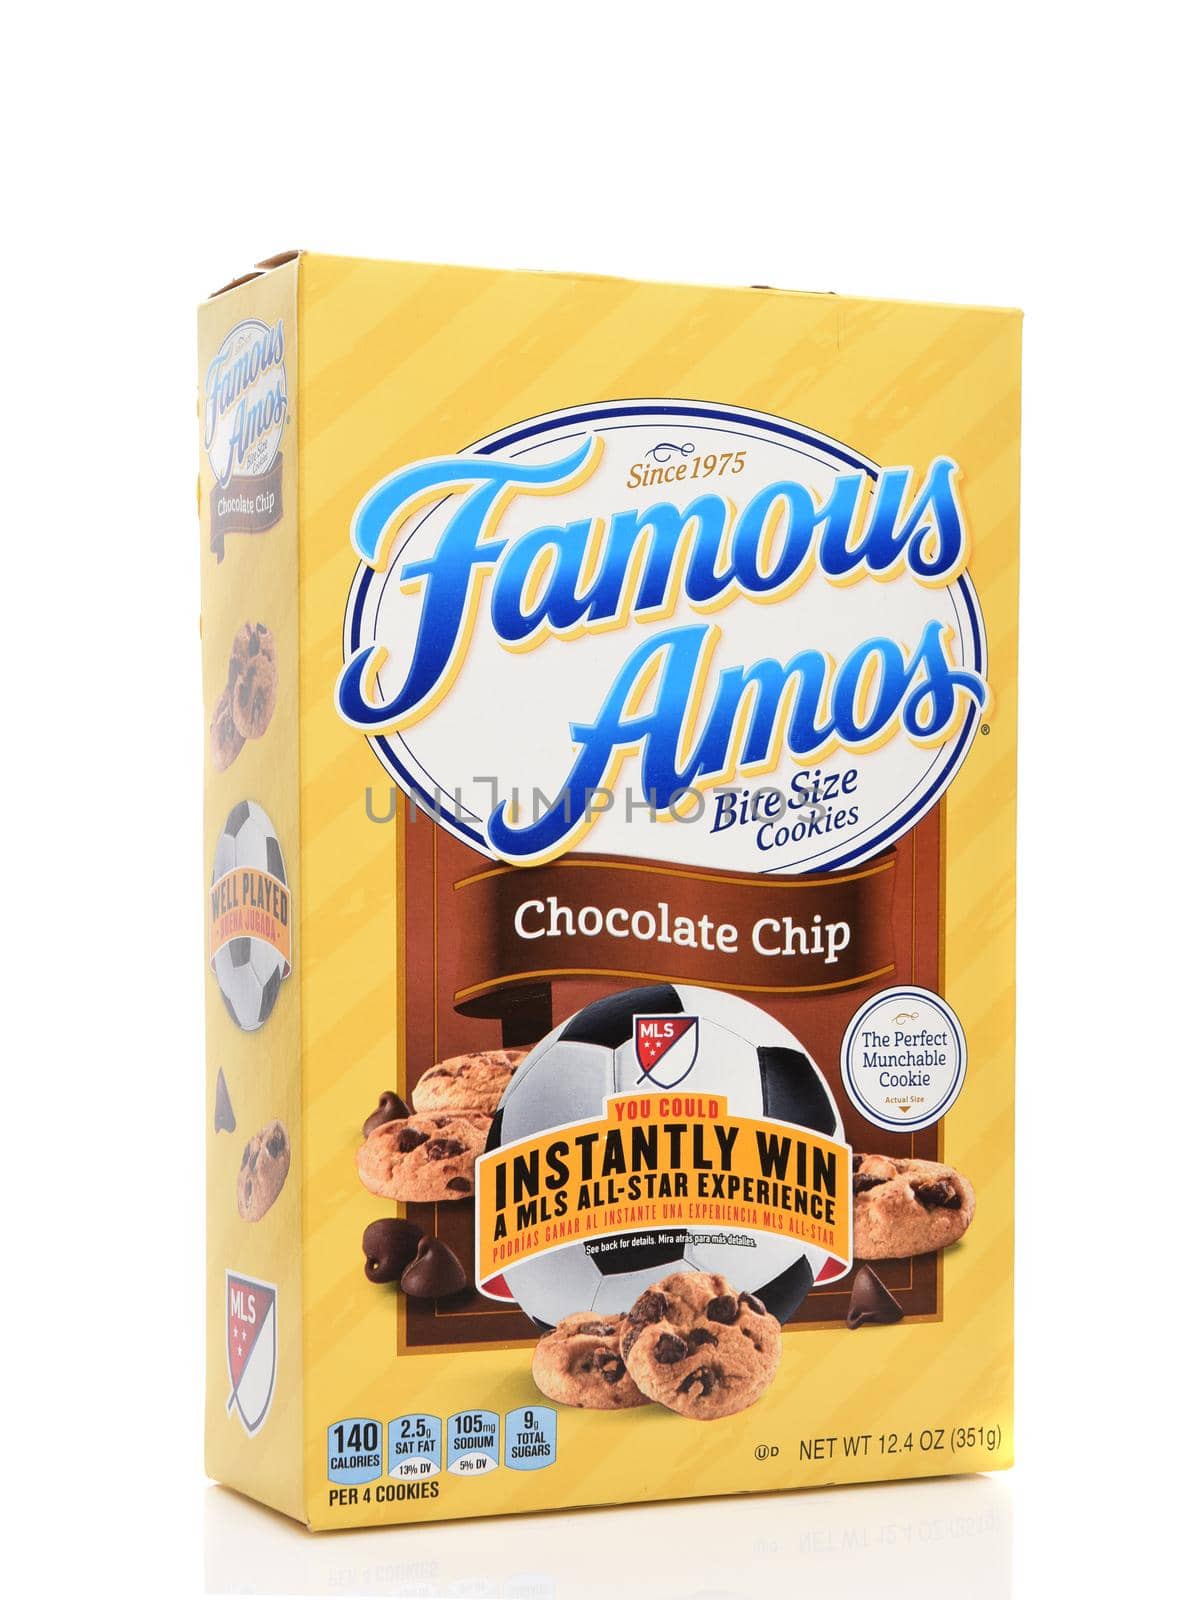 IRVINE, CALIFORNIA - AUGUST 14, 2019: A box of Famous Amos bite size chocolate chip cookies. 